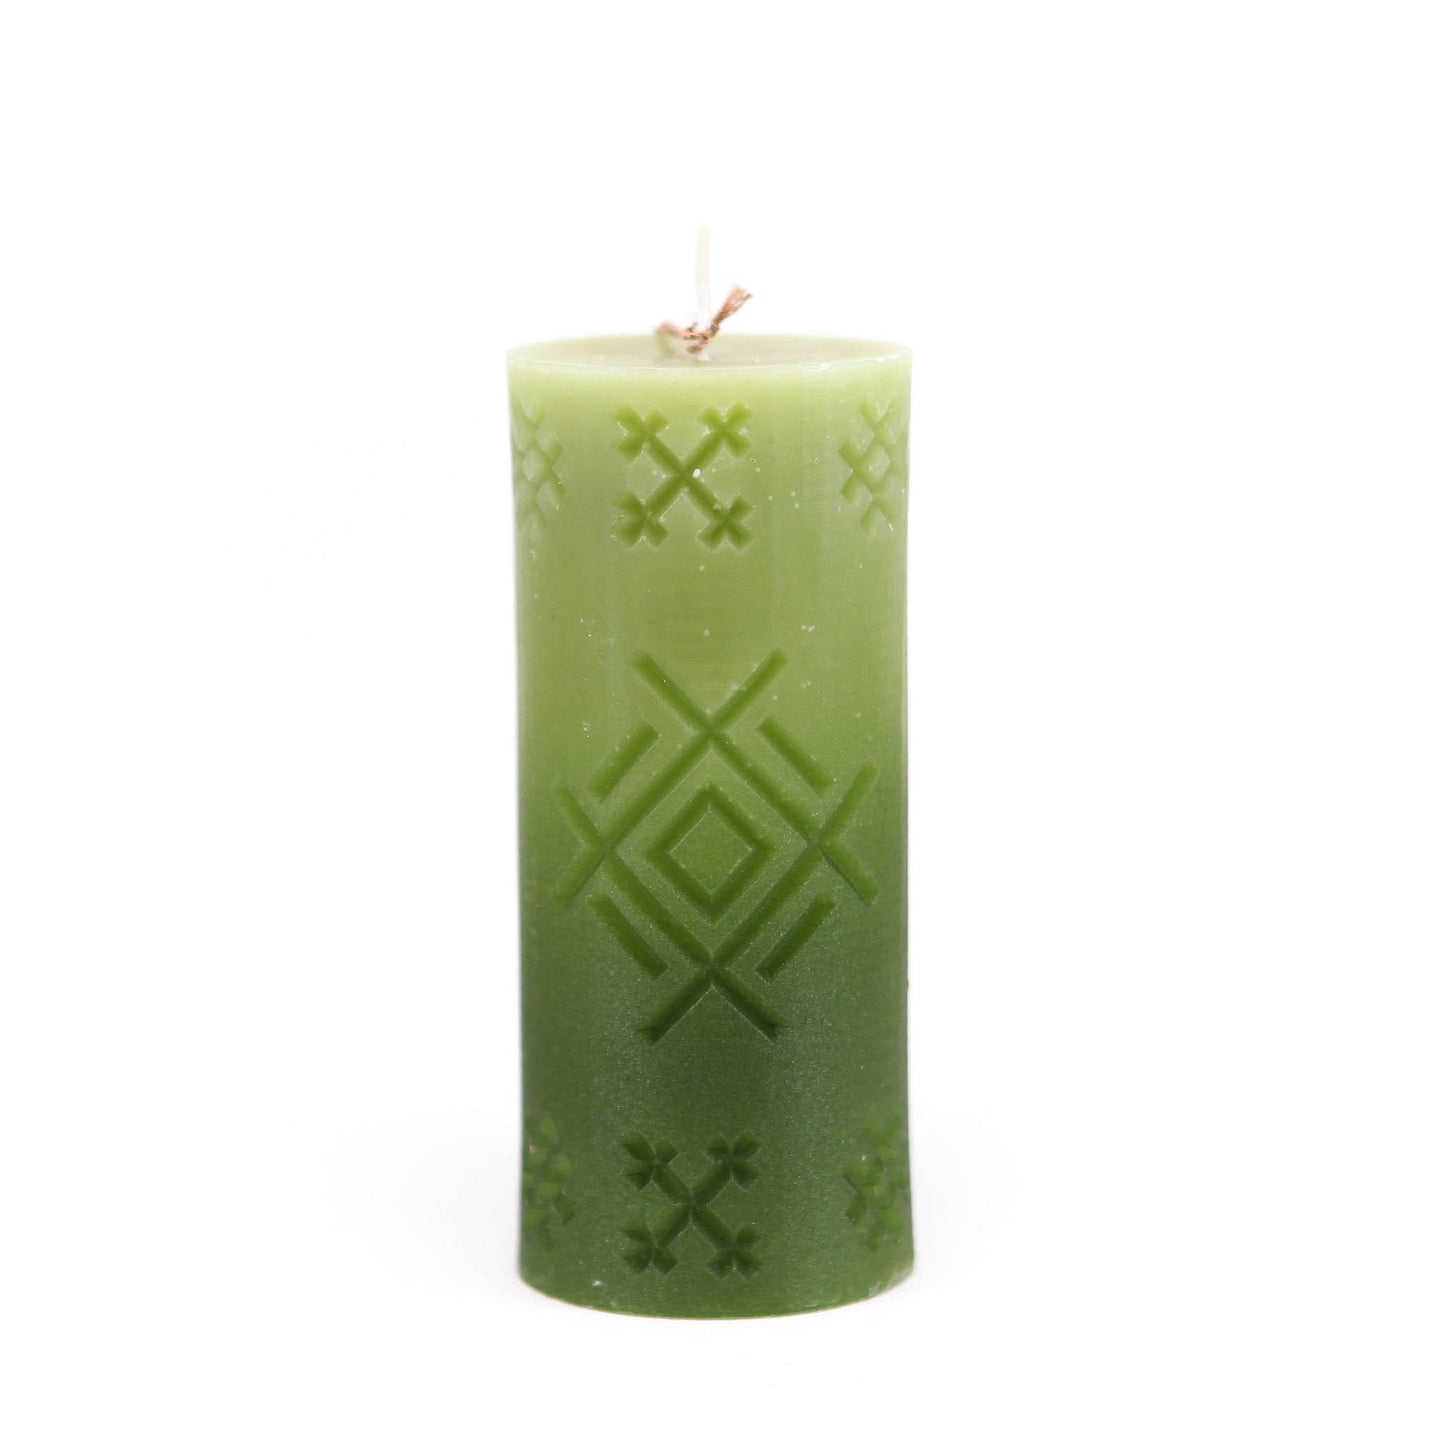 Candle with Latvian rune "Well", green